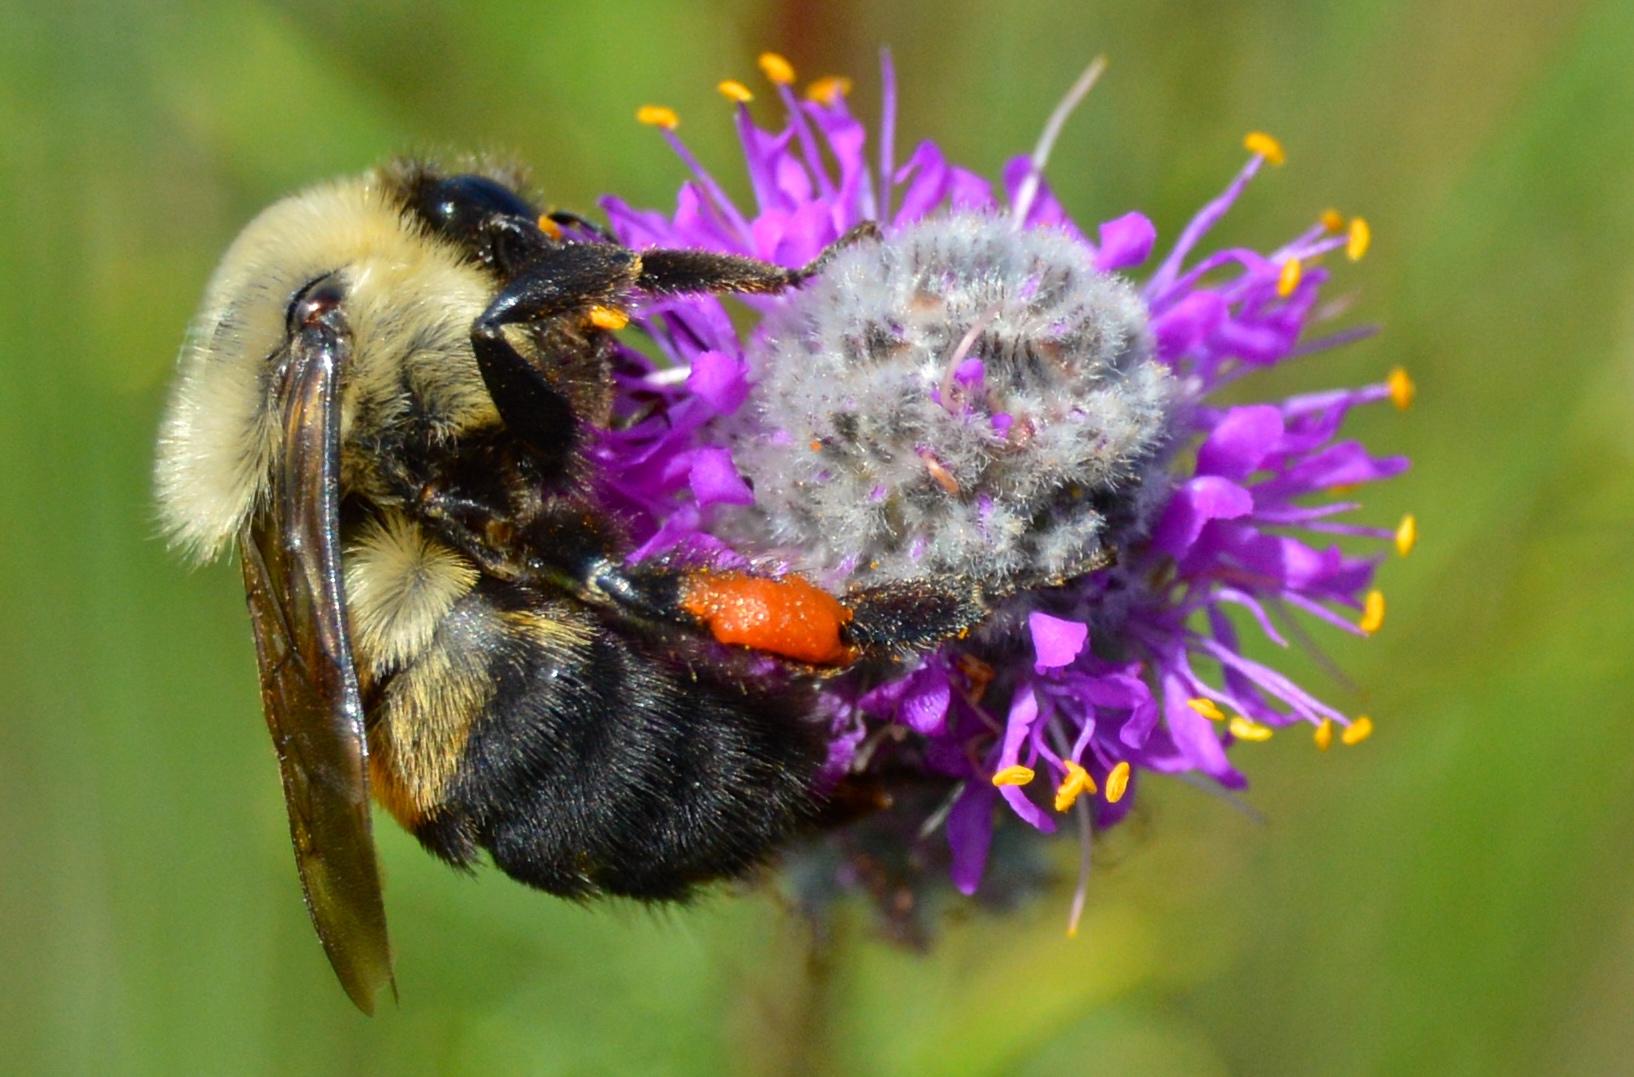 A fuzzy, yellow and black striped bumble bee clings to a spherical flower.